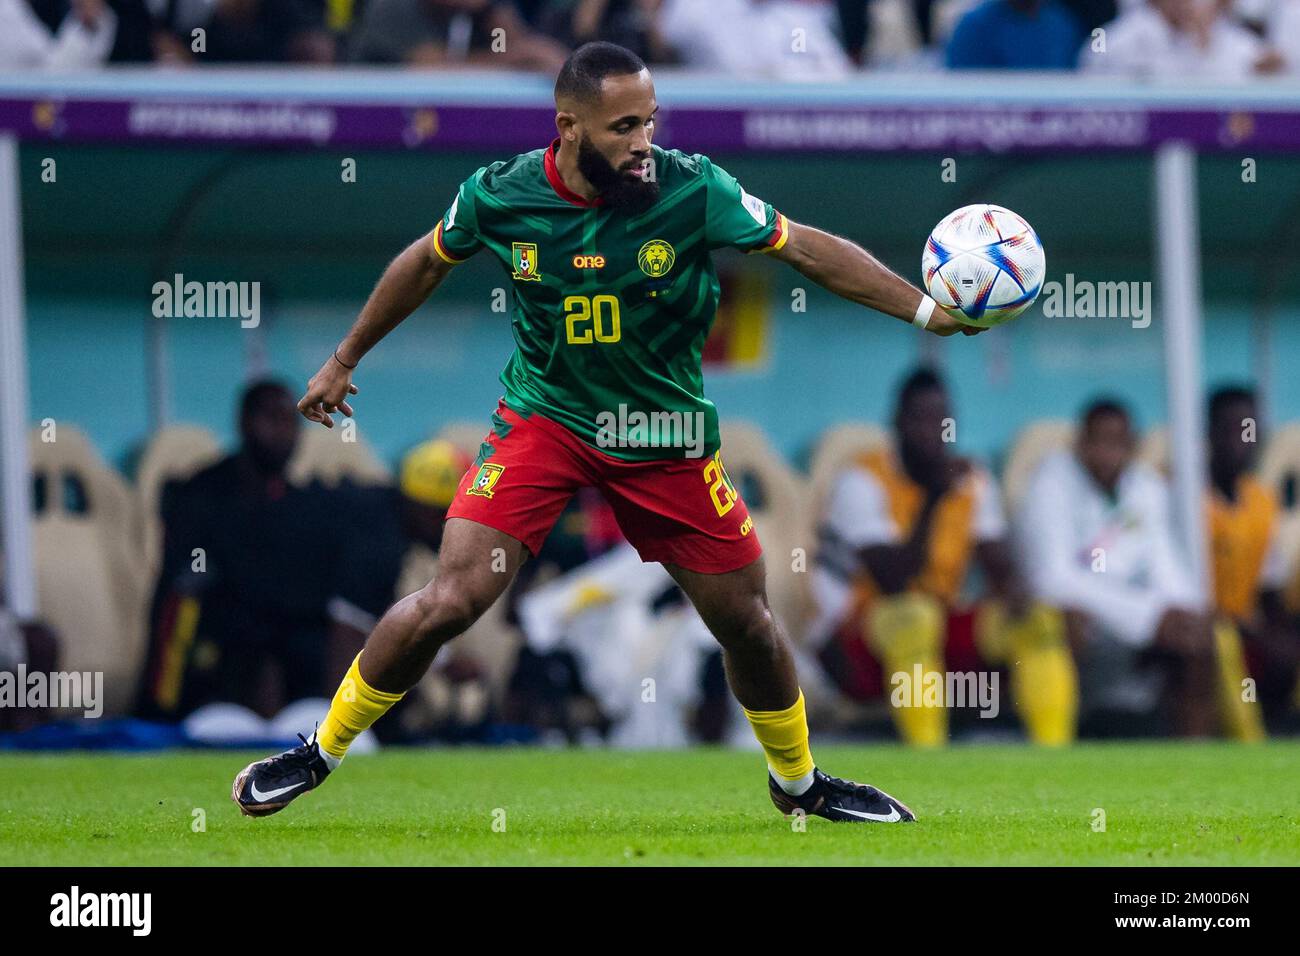 Lusail, Qatar. 02nd Dec, 2022. Soccer: World Cup, Cameroon - Brazil, Preliminary round, Group G, Matchday 3, Lusail Stadium, Cameroon's Bryan Mbeumo in action. Credit: Tom Weller/dpa/Alamy Live News Stock Photo